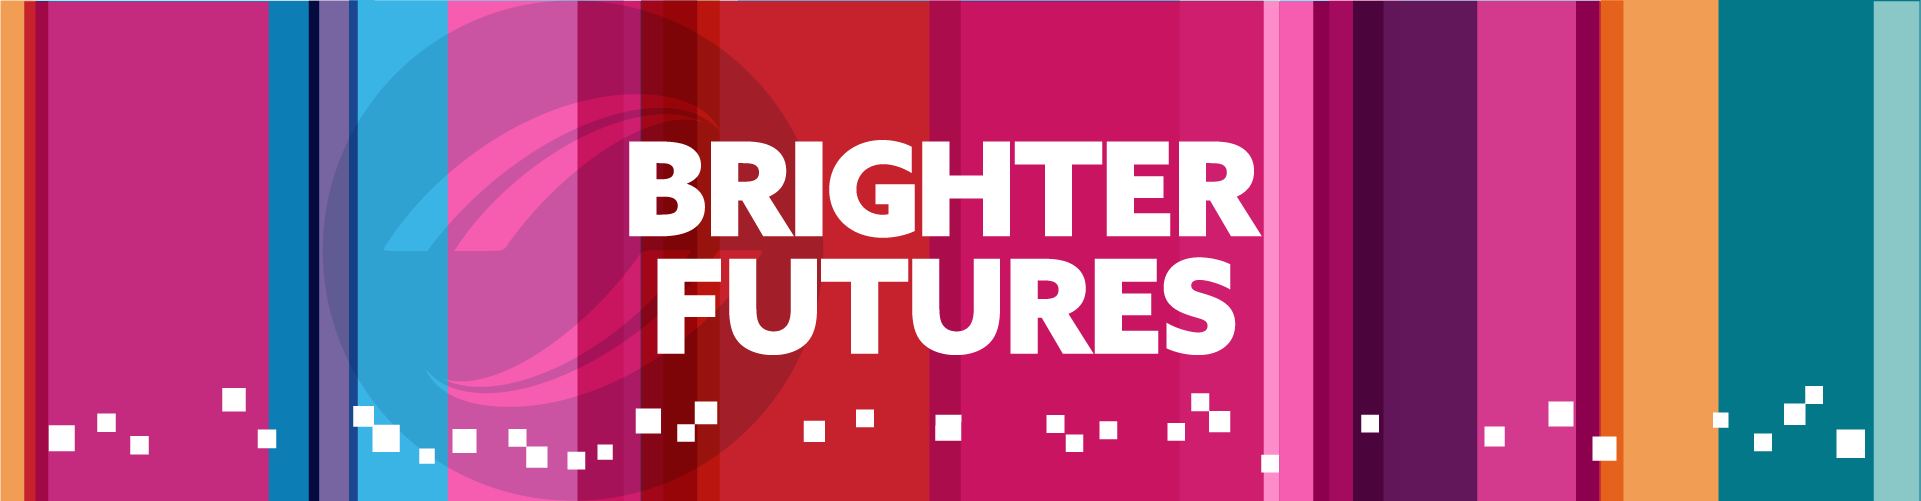 Text Brighter Futures